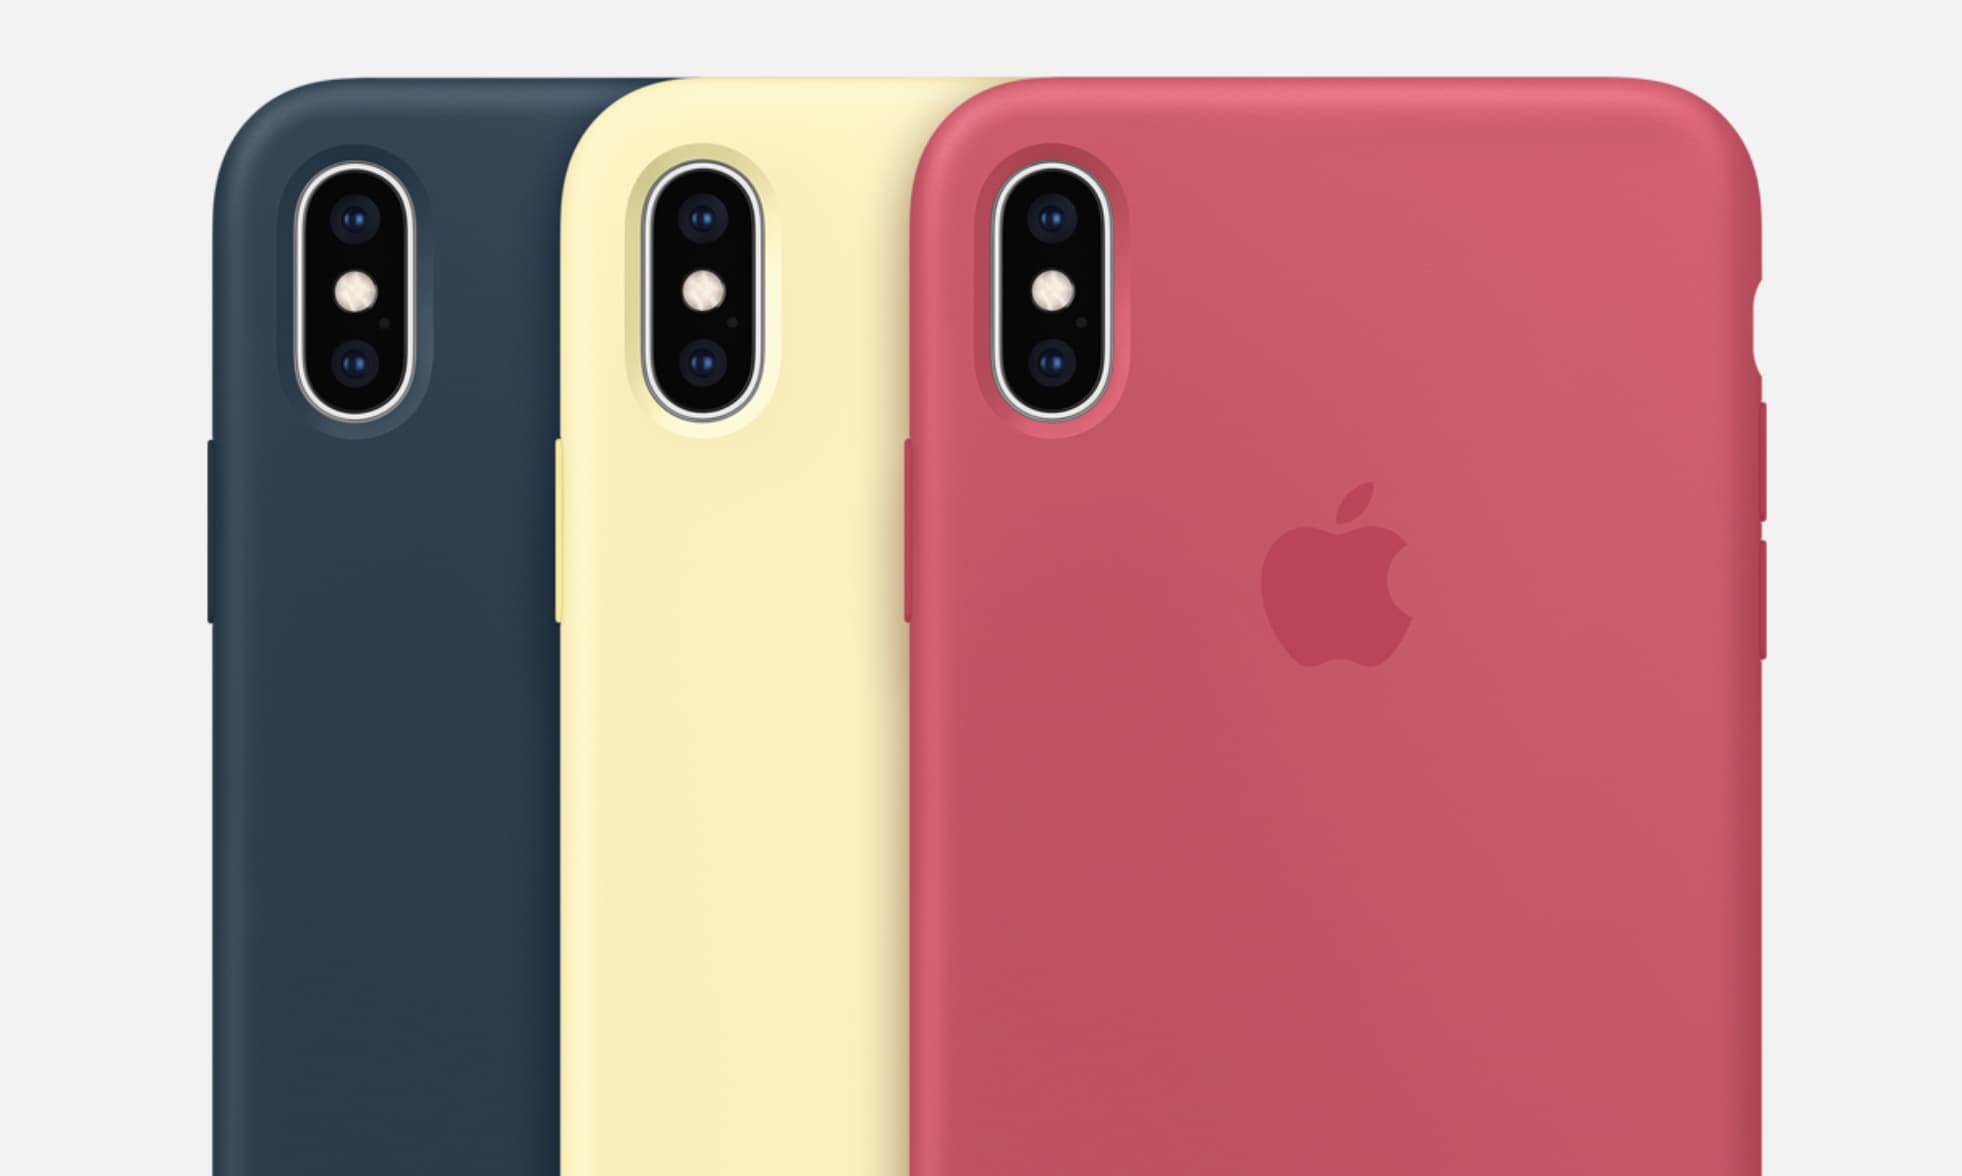 Apple’s new silicone cases for iPhone XS